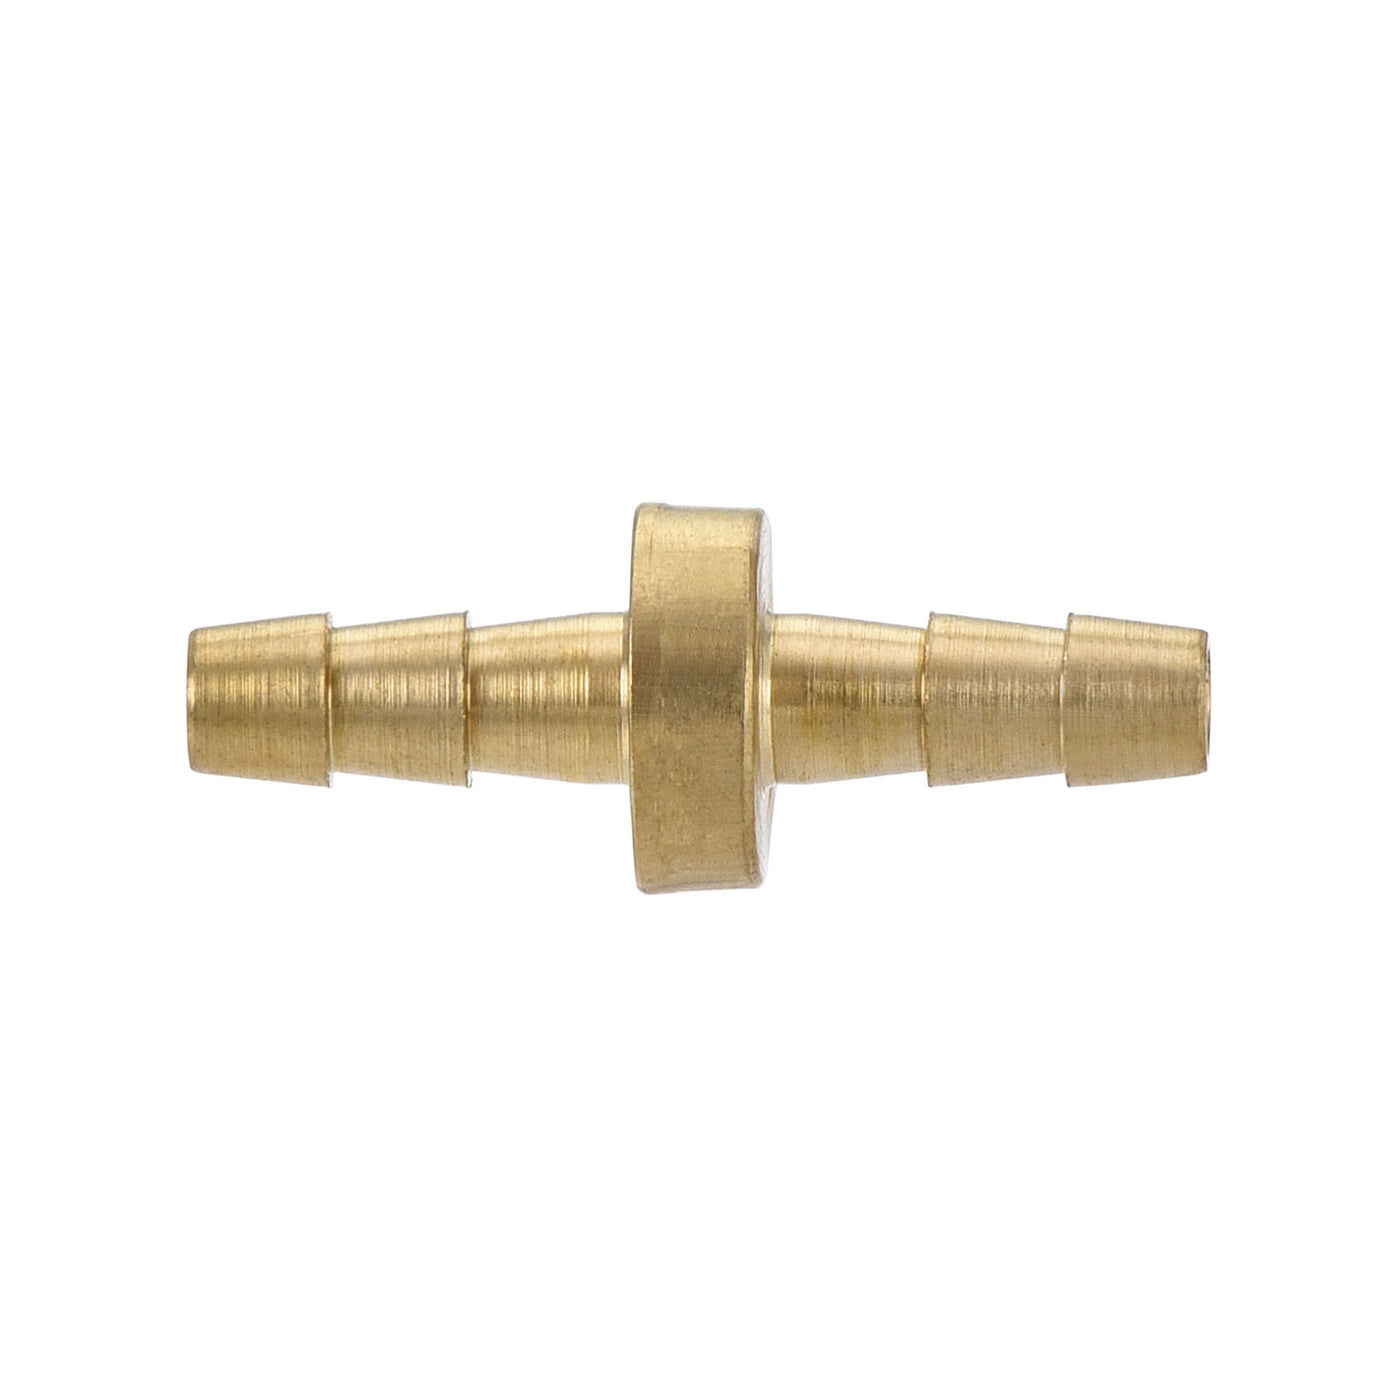 uxcell Uxcell Hose Barb Fitting, 1/8x1/8inch Brass Hollow Straight Quick Connector for Water Fuel Air Oil Gas, Pack of 2